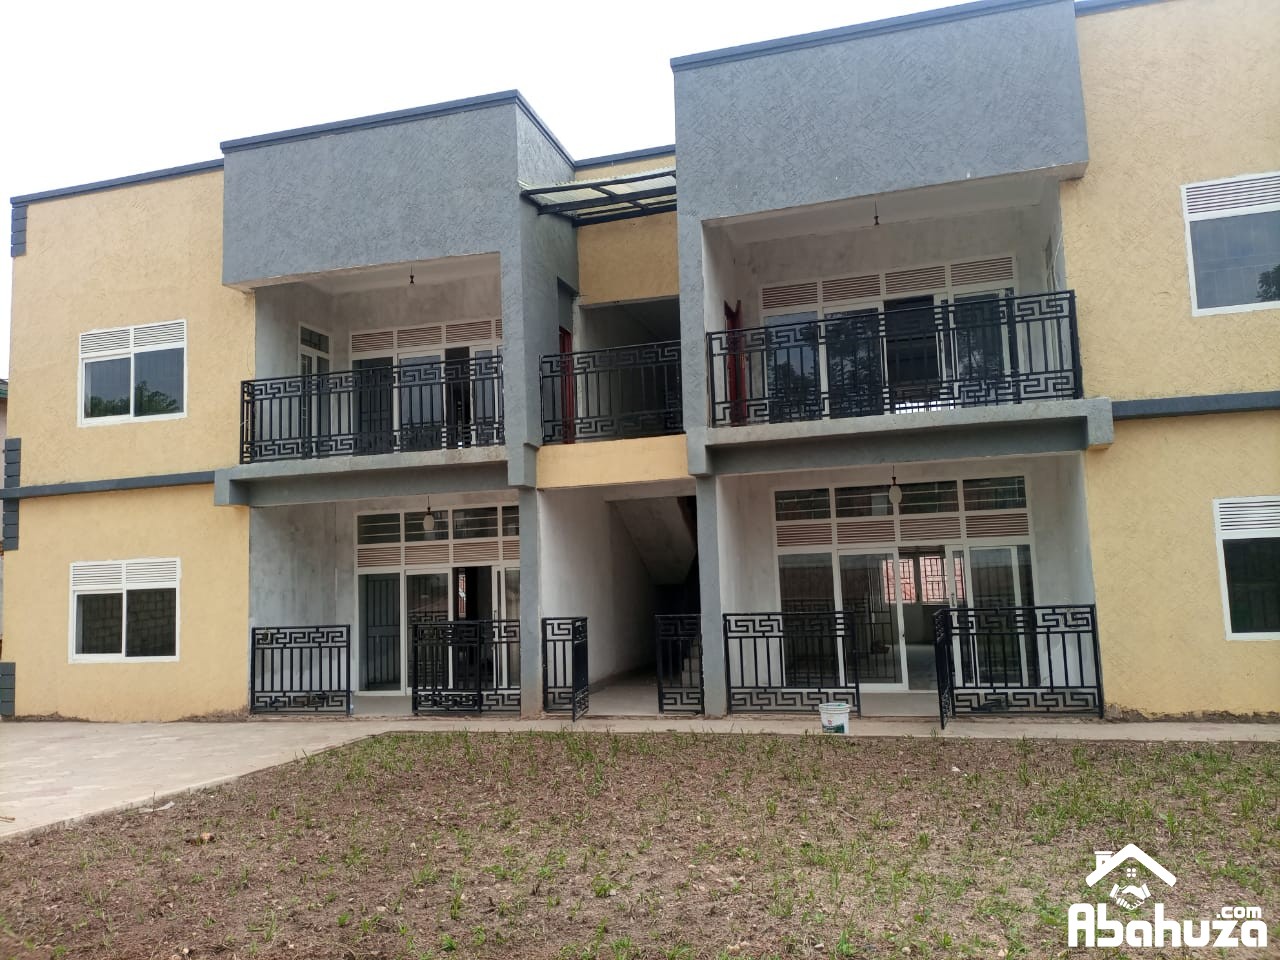 A NEW 2 BEDROOM APARTMENT FOR RENT IN KIGALI AT KICUKIRO